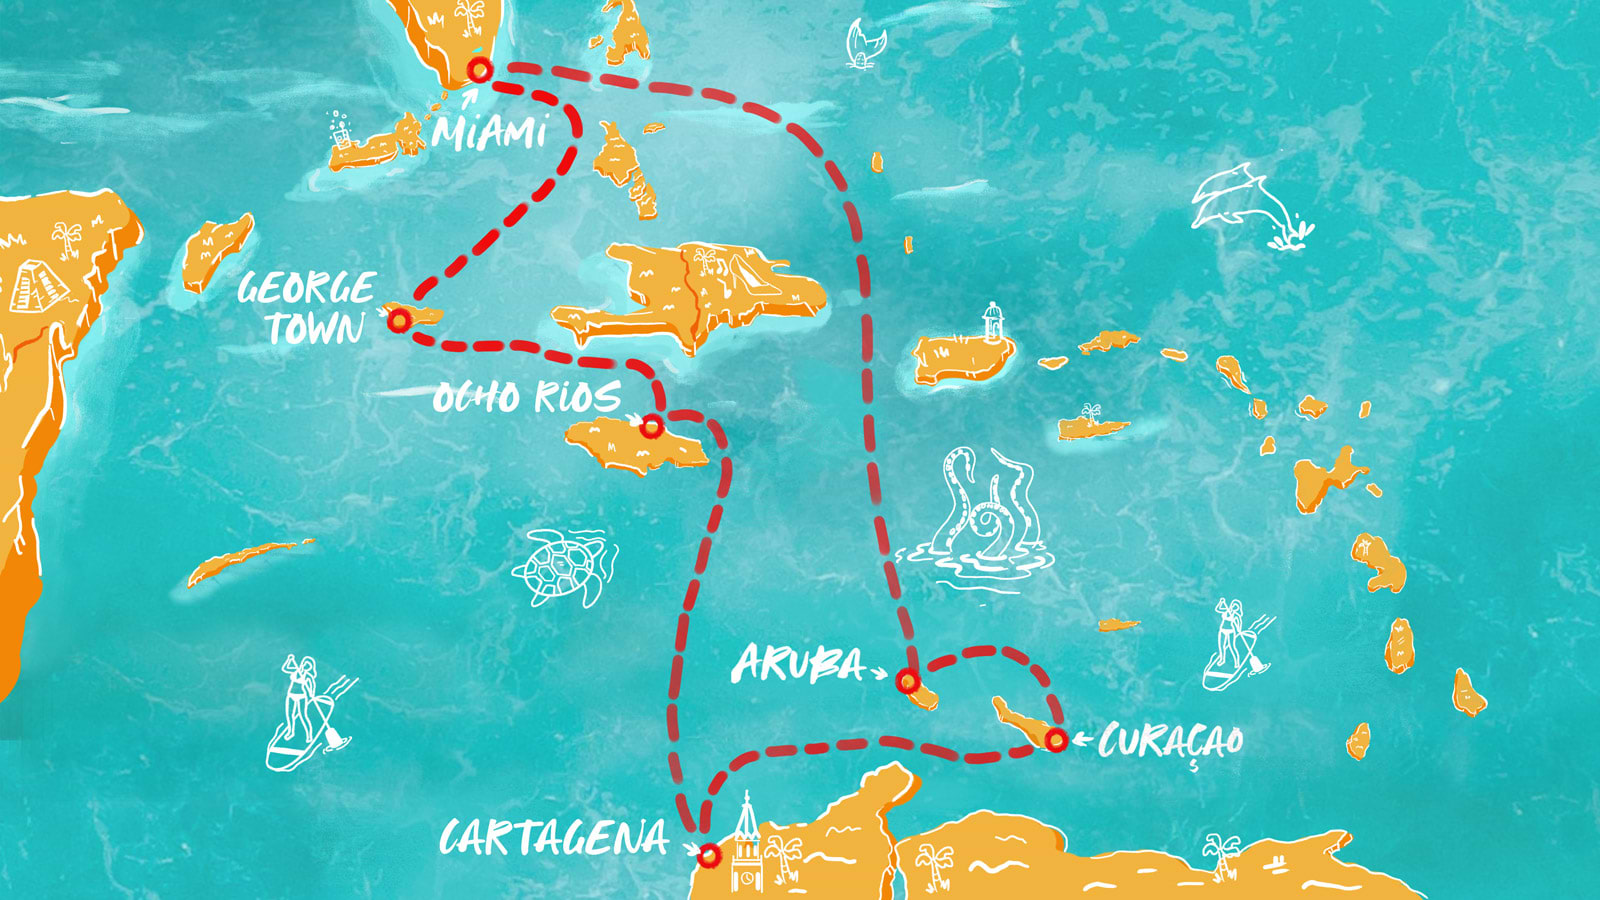 Map of Colorful Curacao to the Charming Caymans itinerary